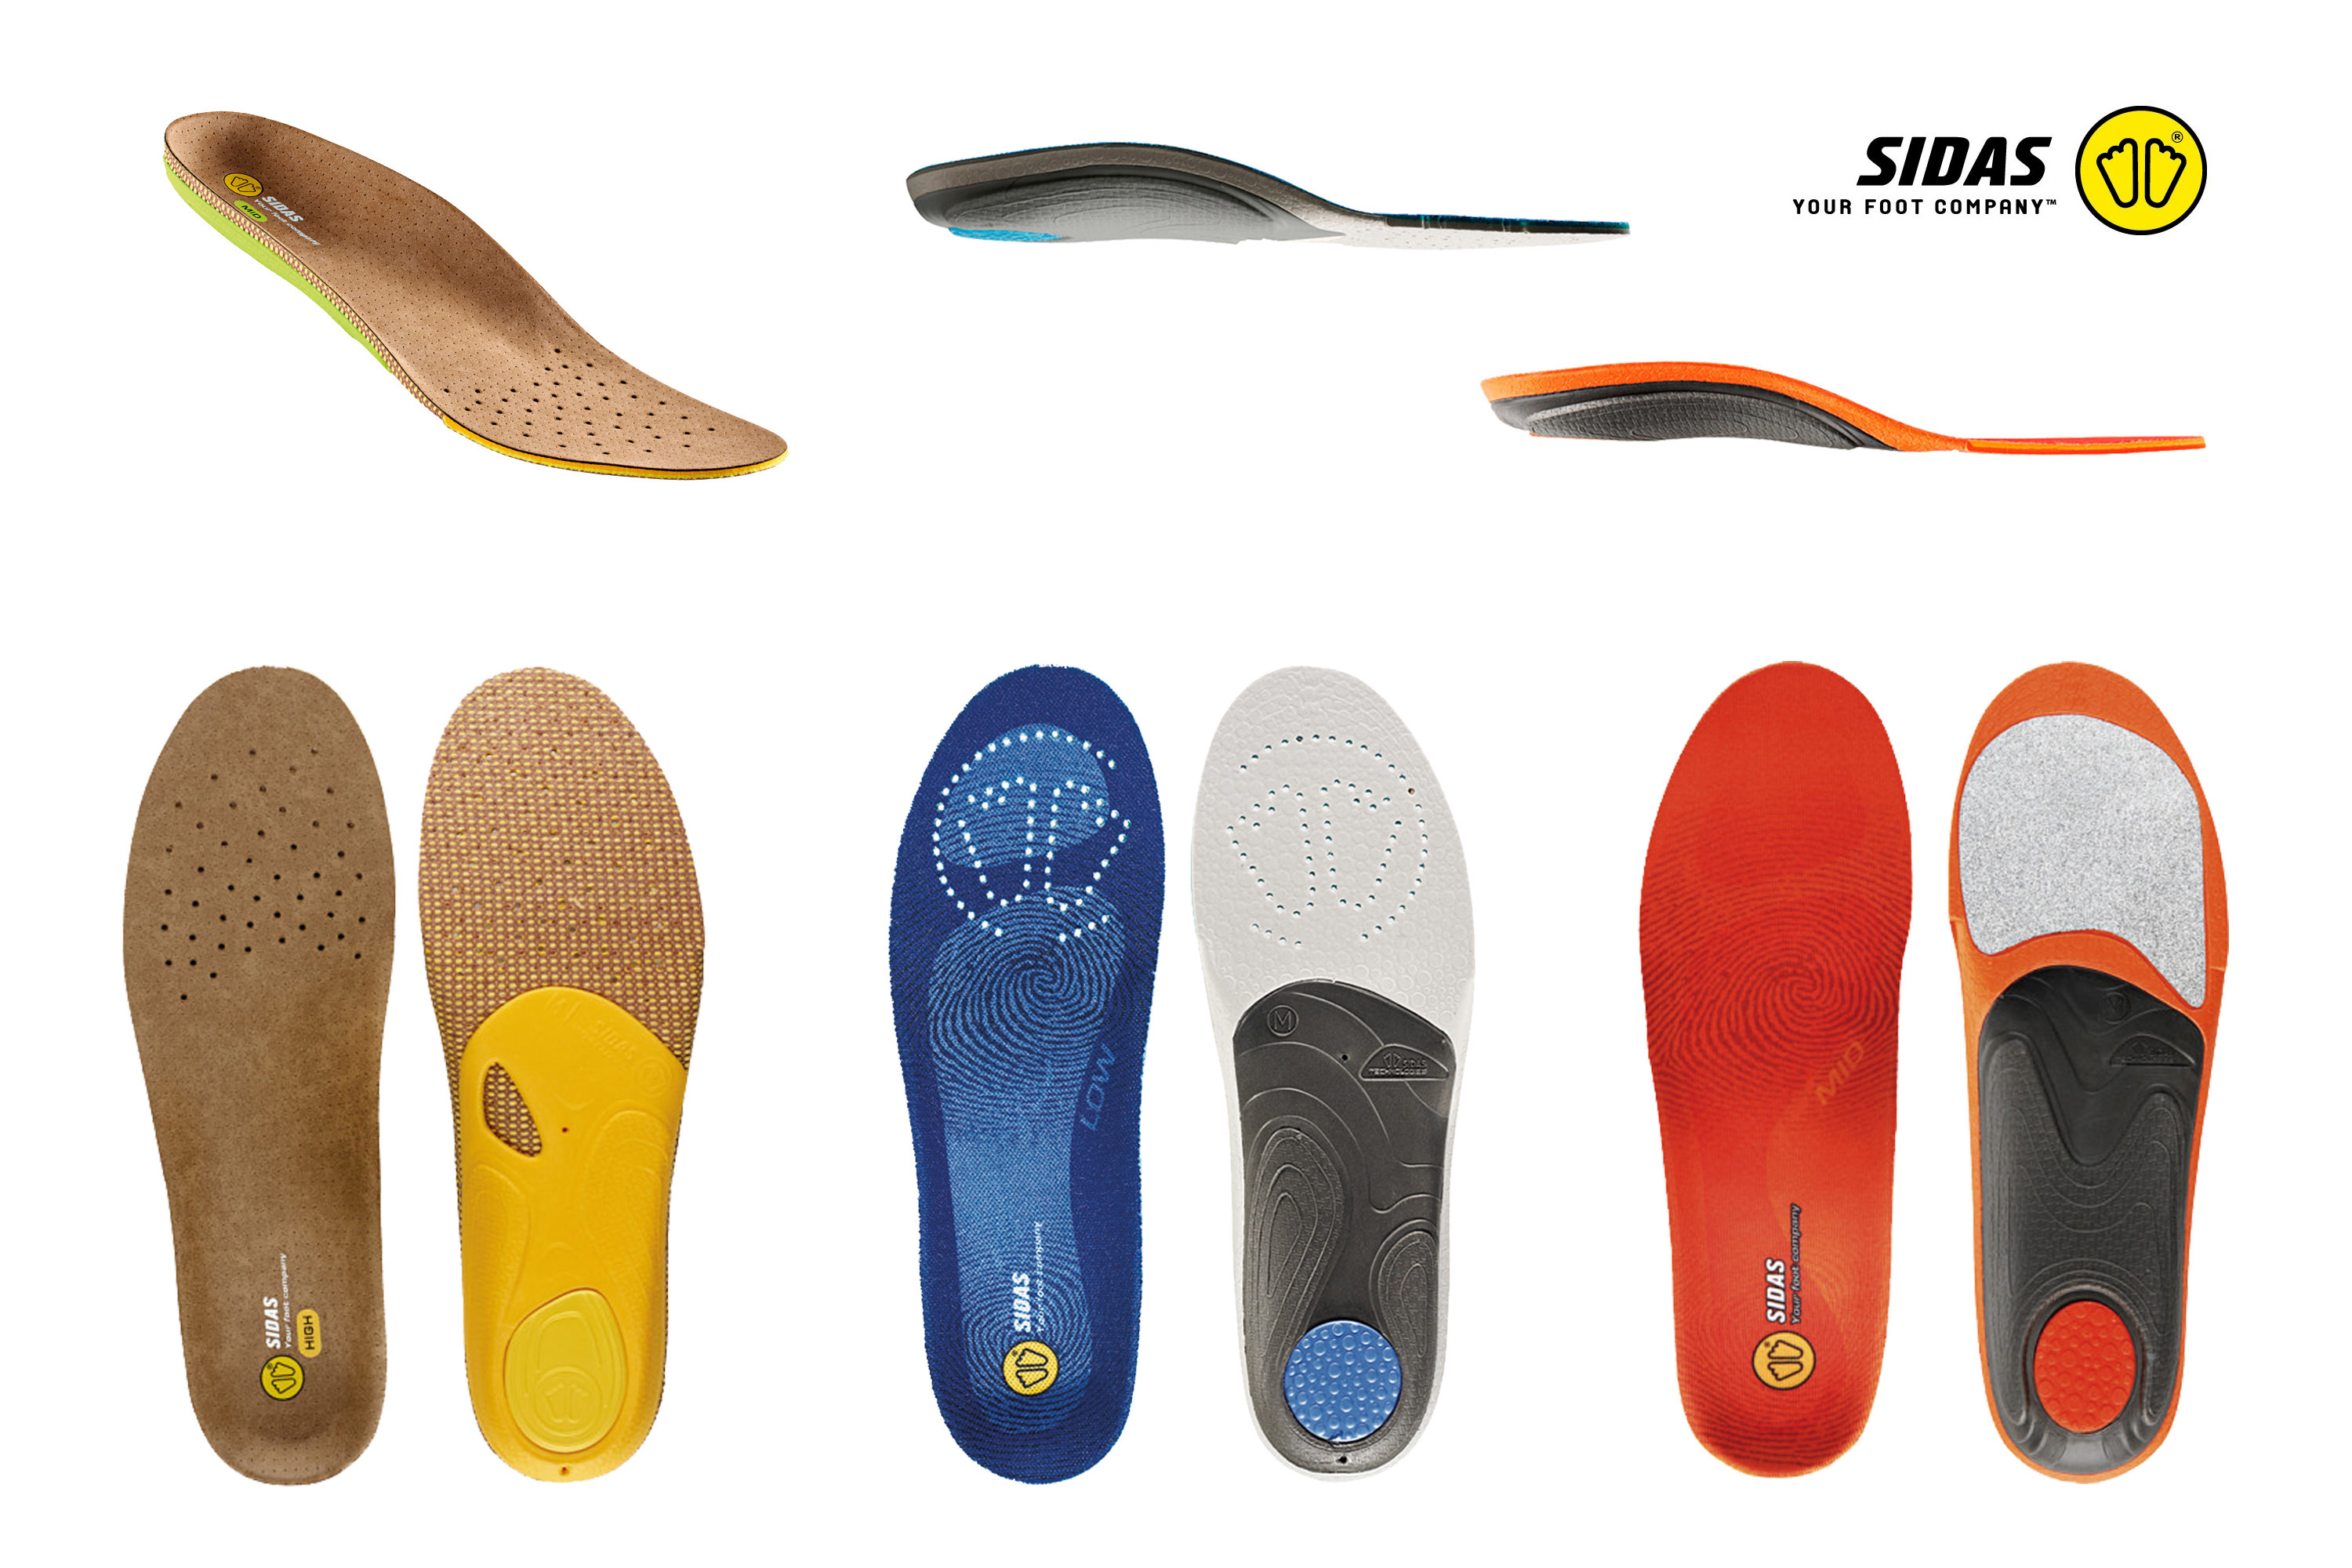 professional insoles for ski boots, hiking and everyday shoes